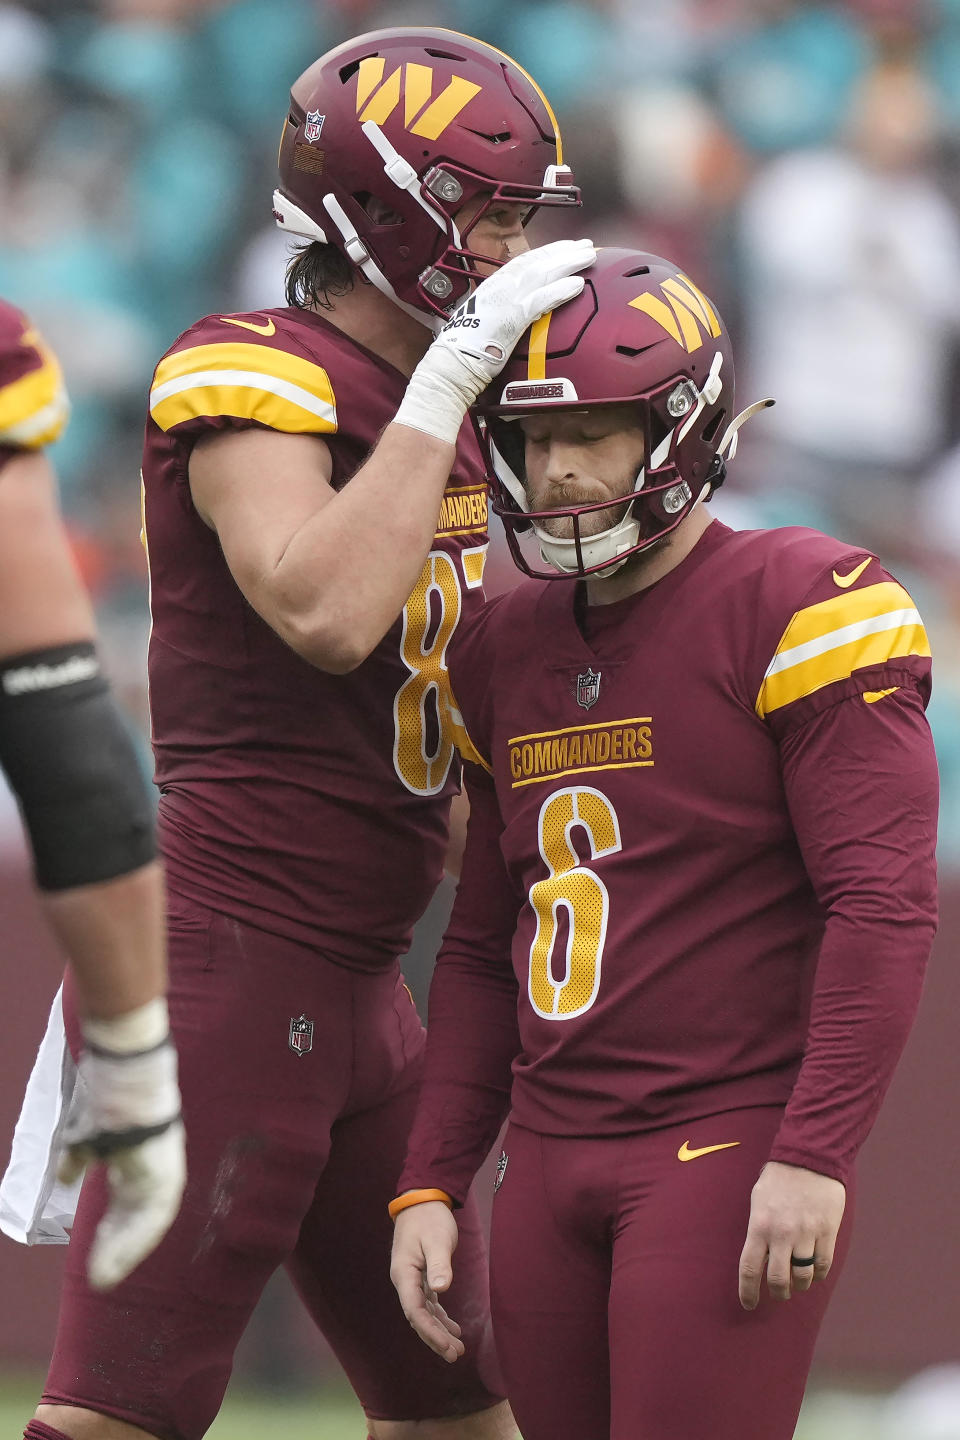 Washington Commanders place kicker Joey Slye (6) reacts after missing a field goal next to John Bates during the second half of an NFL football game against the Miami Dolphins Sunday, Dec. 3, 2023, in Landover, Md. (AP Photo/Mark Schiefelbein)